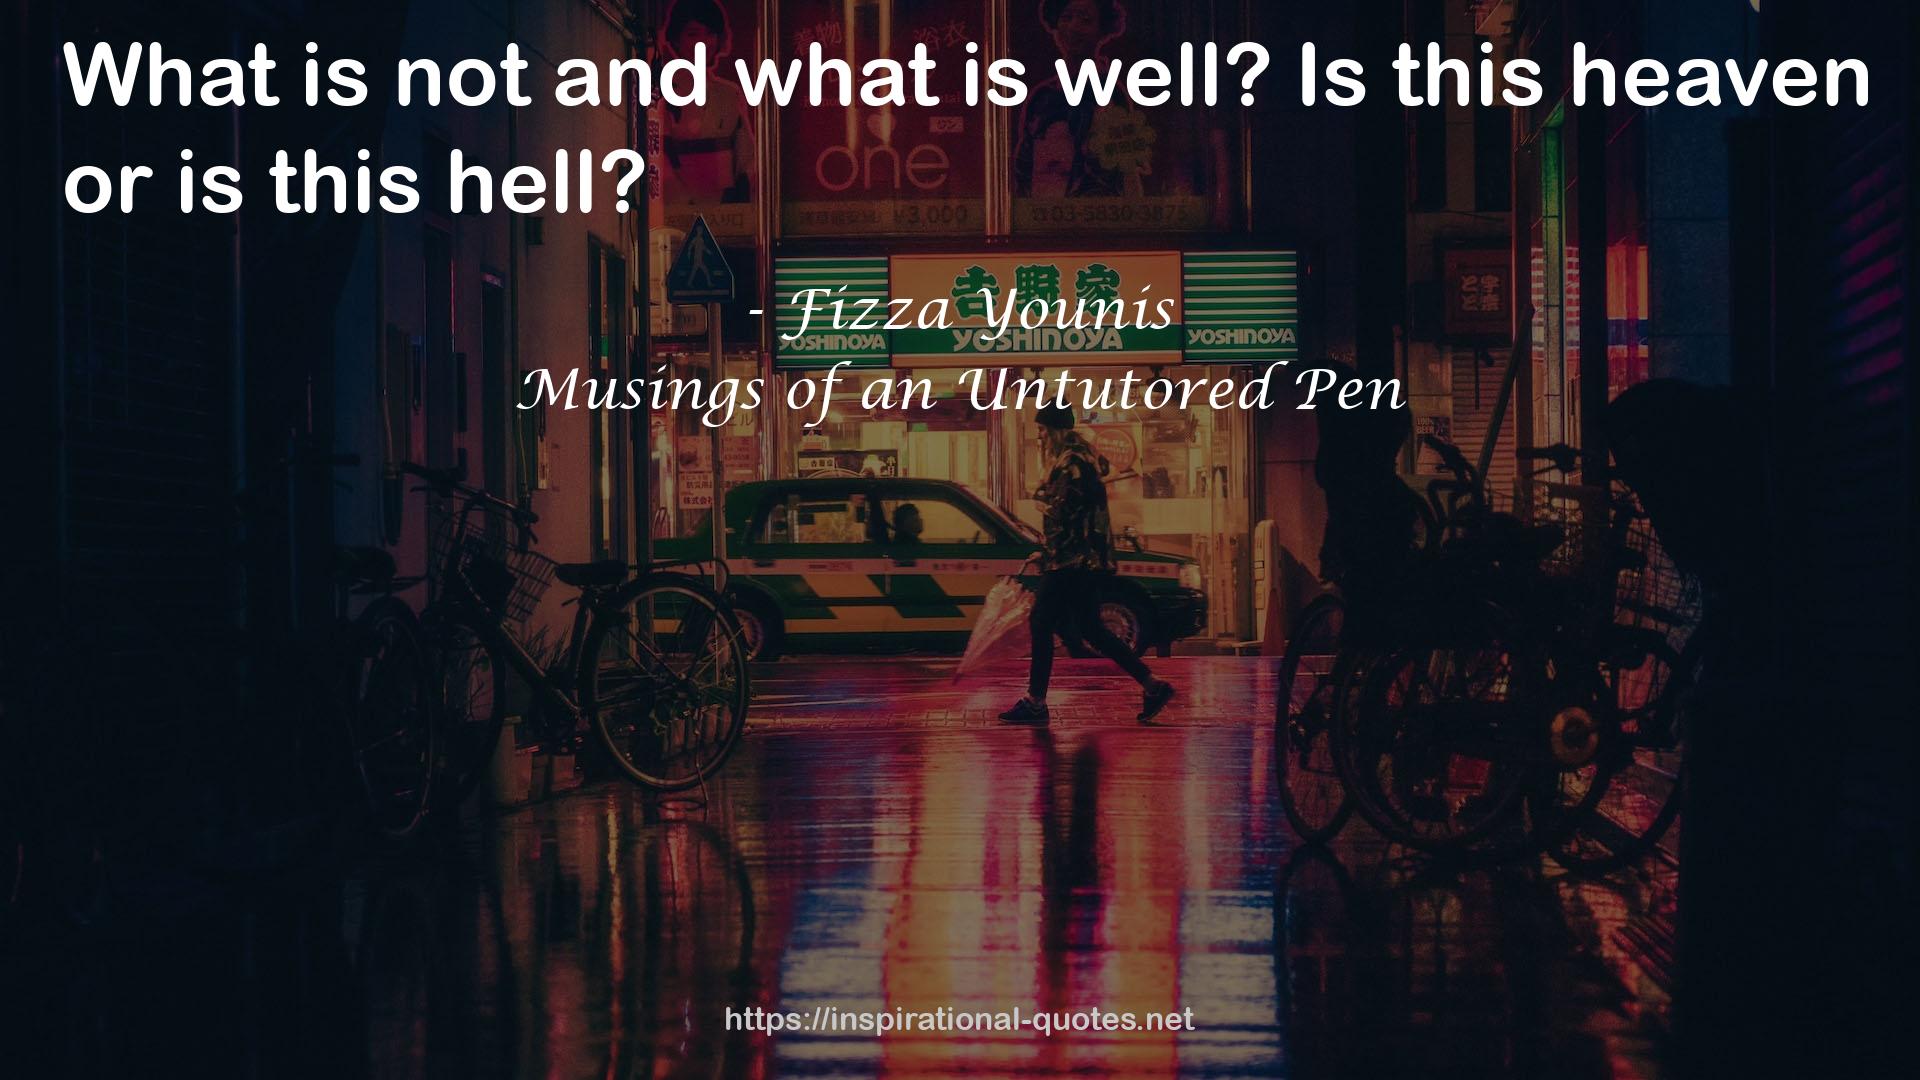 Musings of an Untutored Pen QUOTES